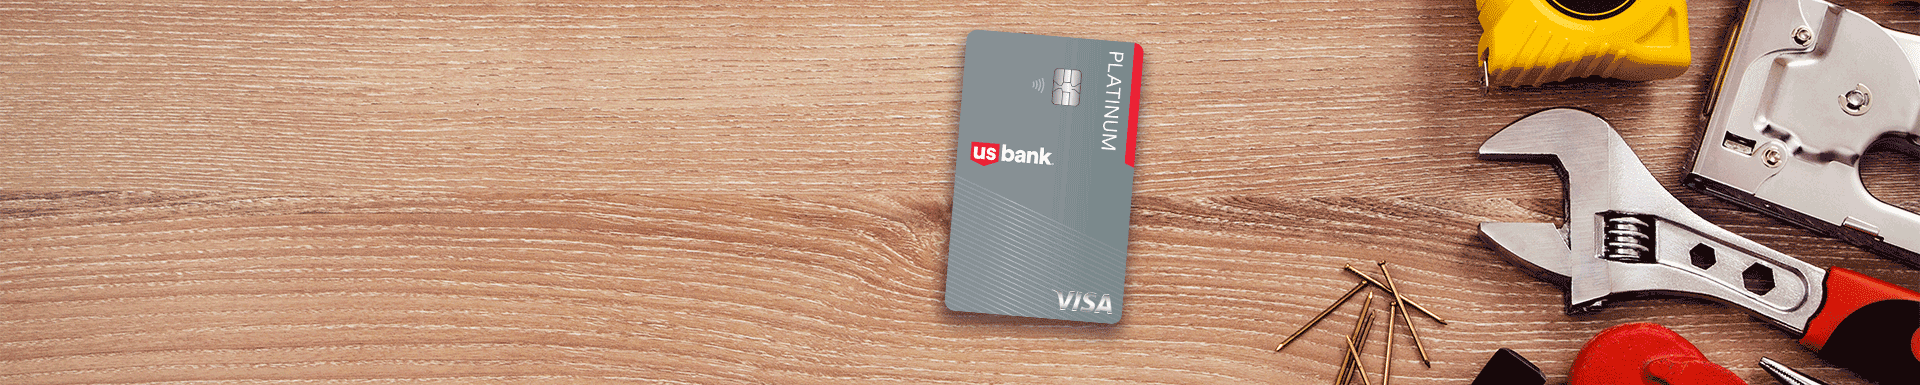 Find the right credit card for you from U.S. Bank